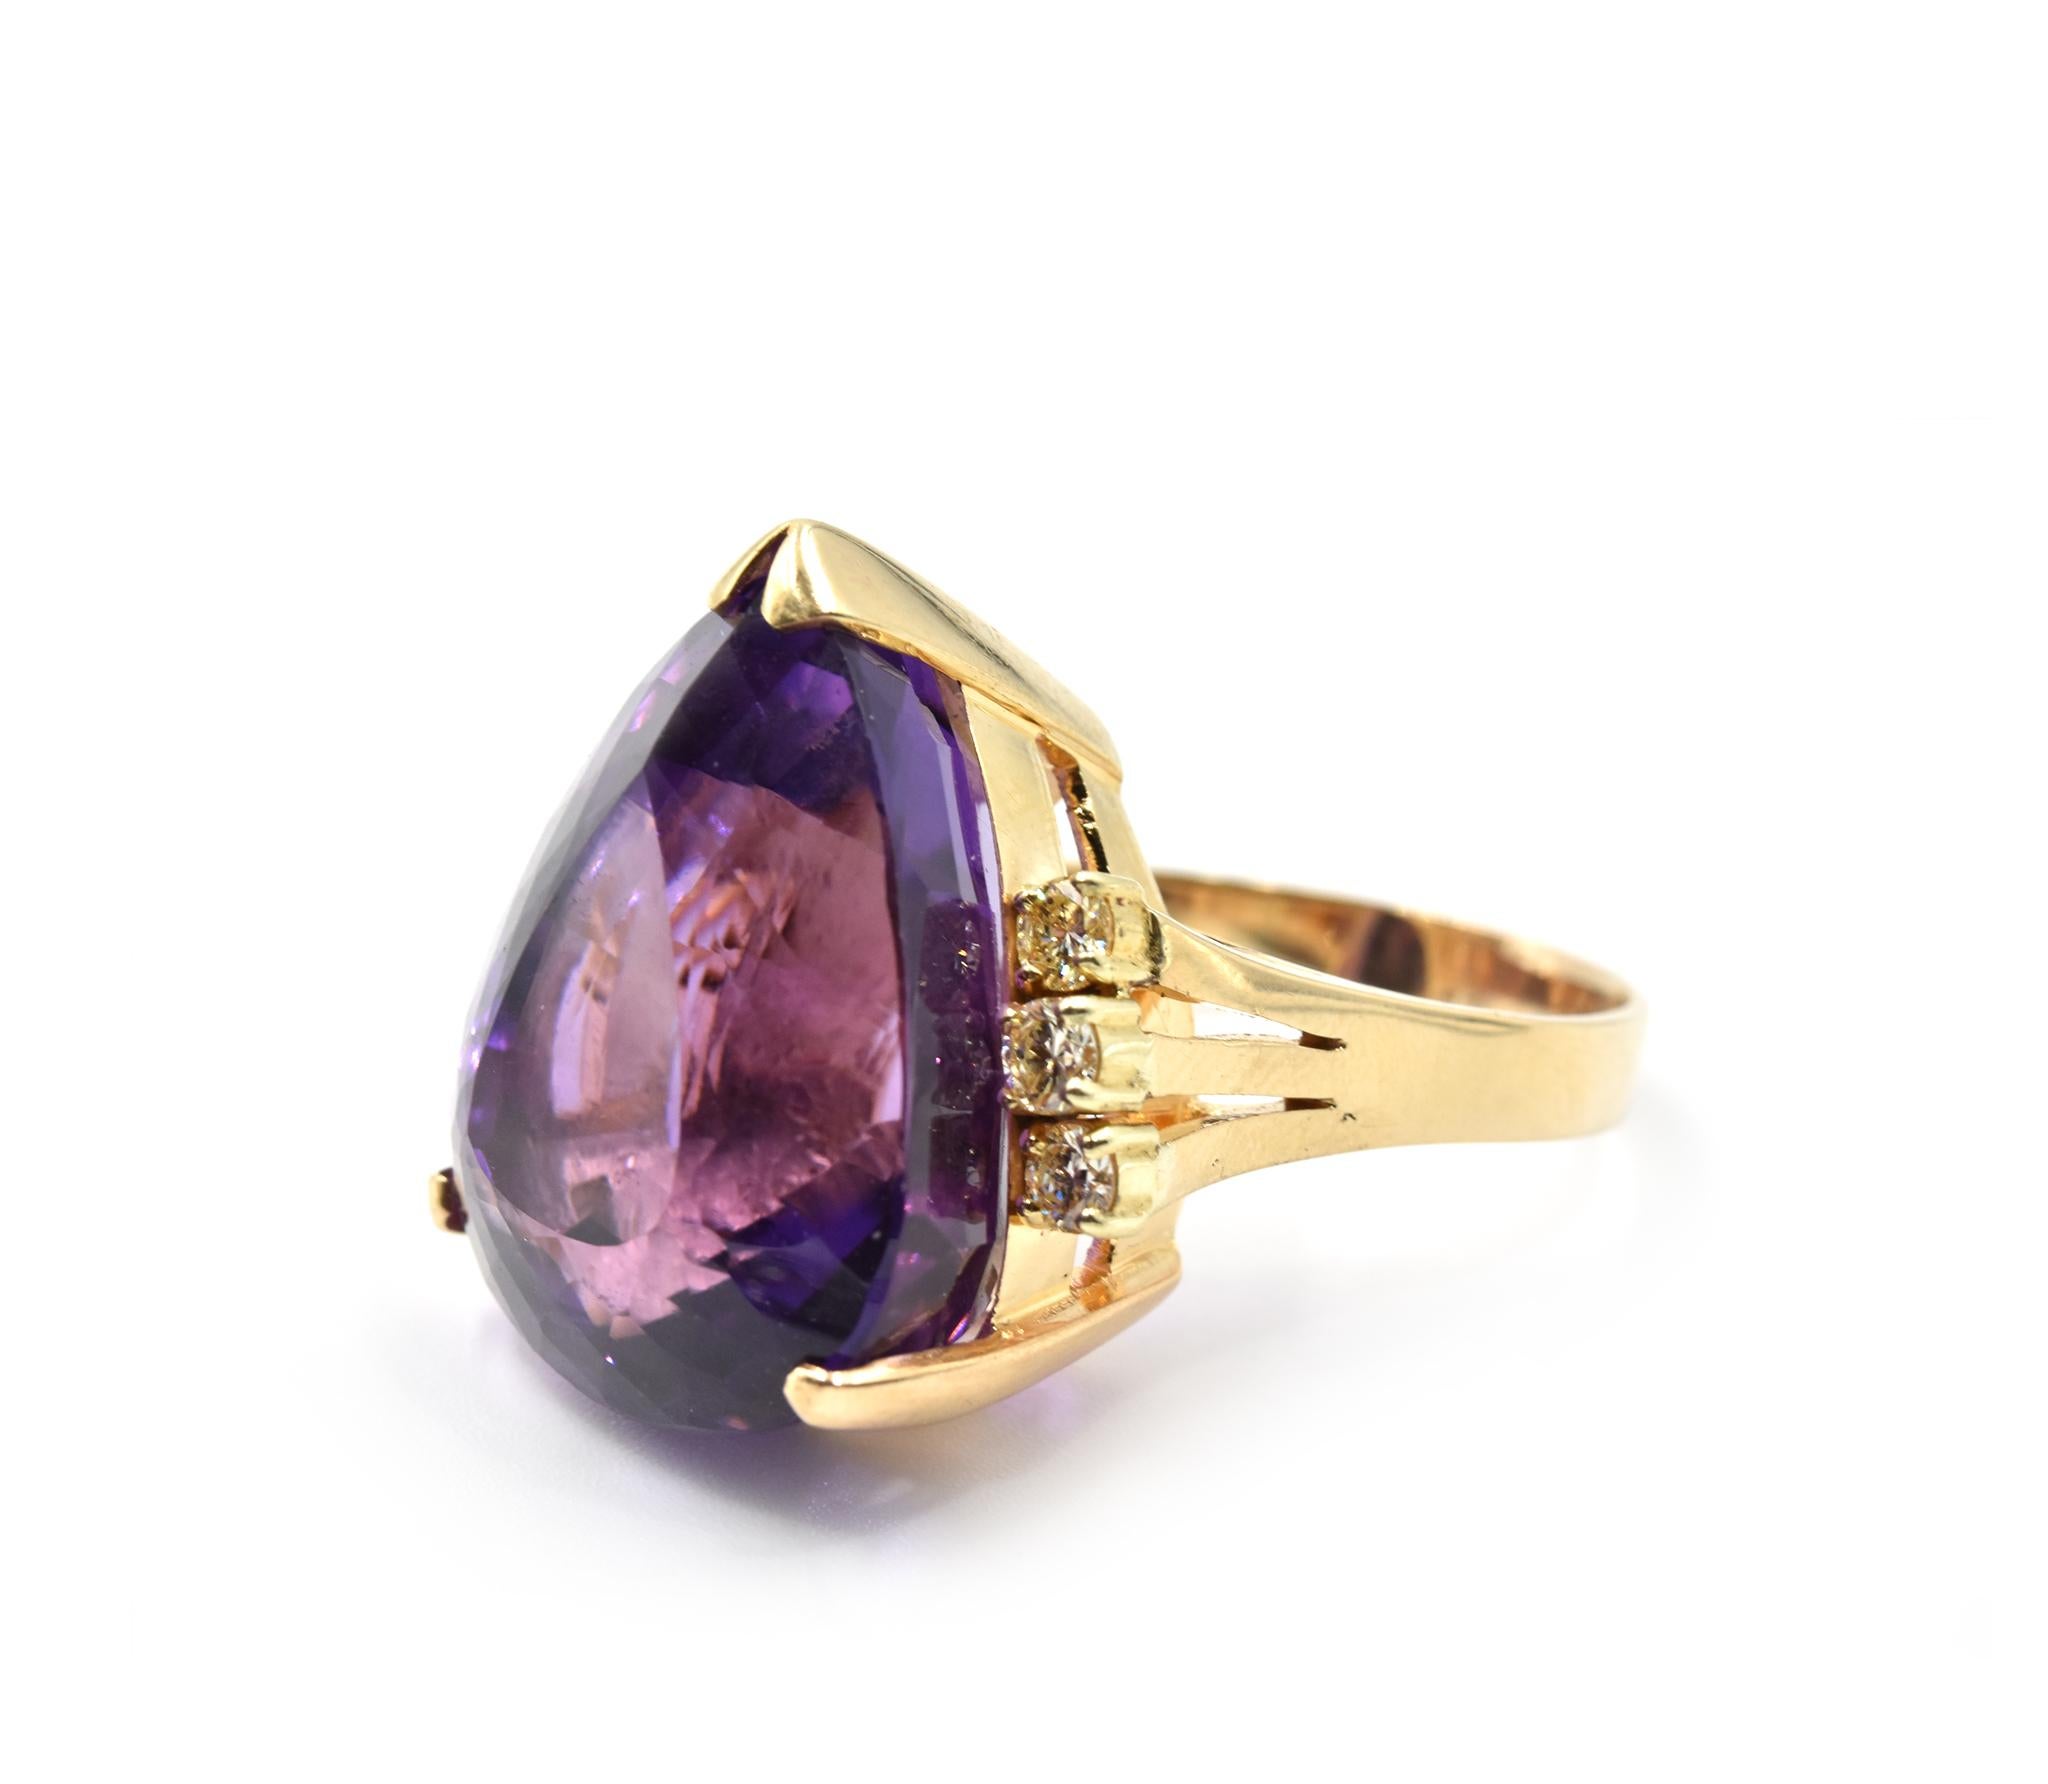 Designer: custom design
Material: 14k white gold
Amethyst: amethyst = 36.5ct
Diamonds: 6 round brilliant diamonds = .60cttw
Color: I
Clarity: VS2
Ring Size: 9 ¾ (please allow two additional shipping days for sizing requests) 
Weight: 11.80 grams
